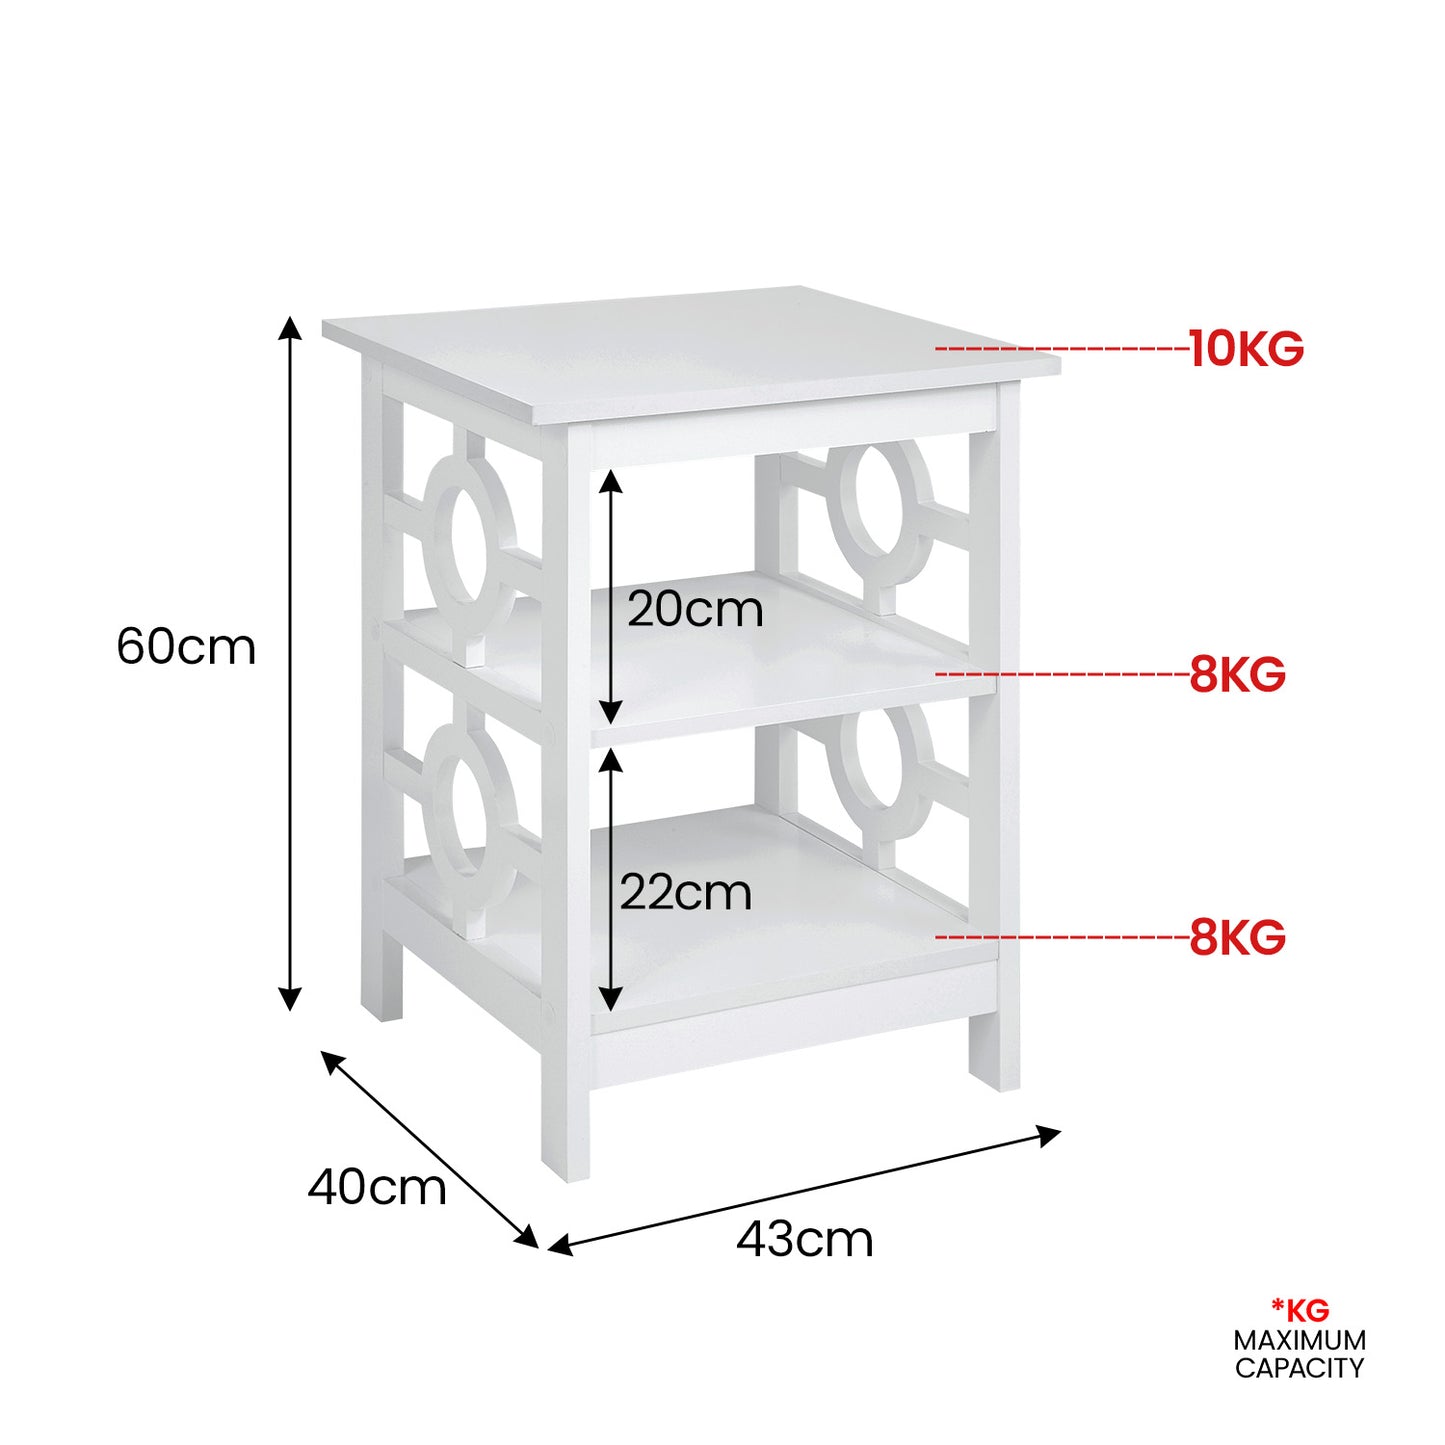 Sarantino Oliver 2-Tier Bedside Table - White